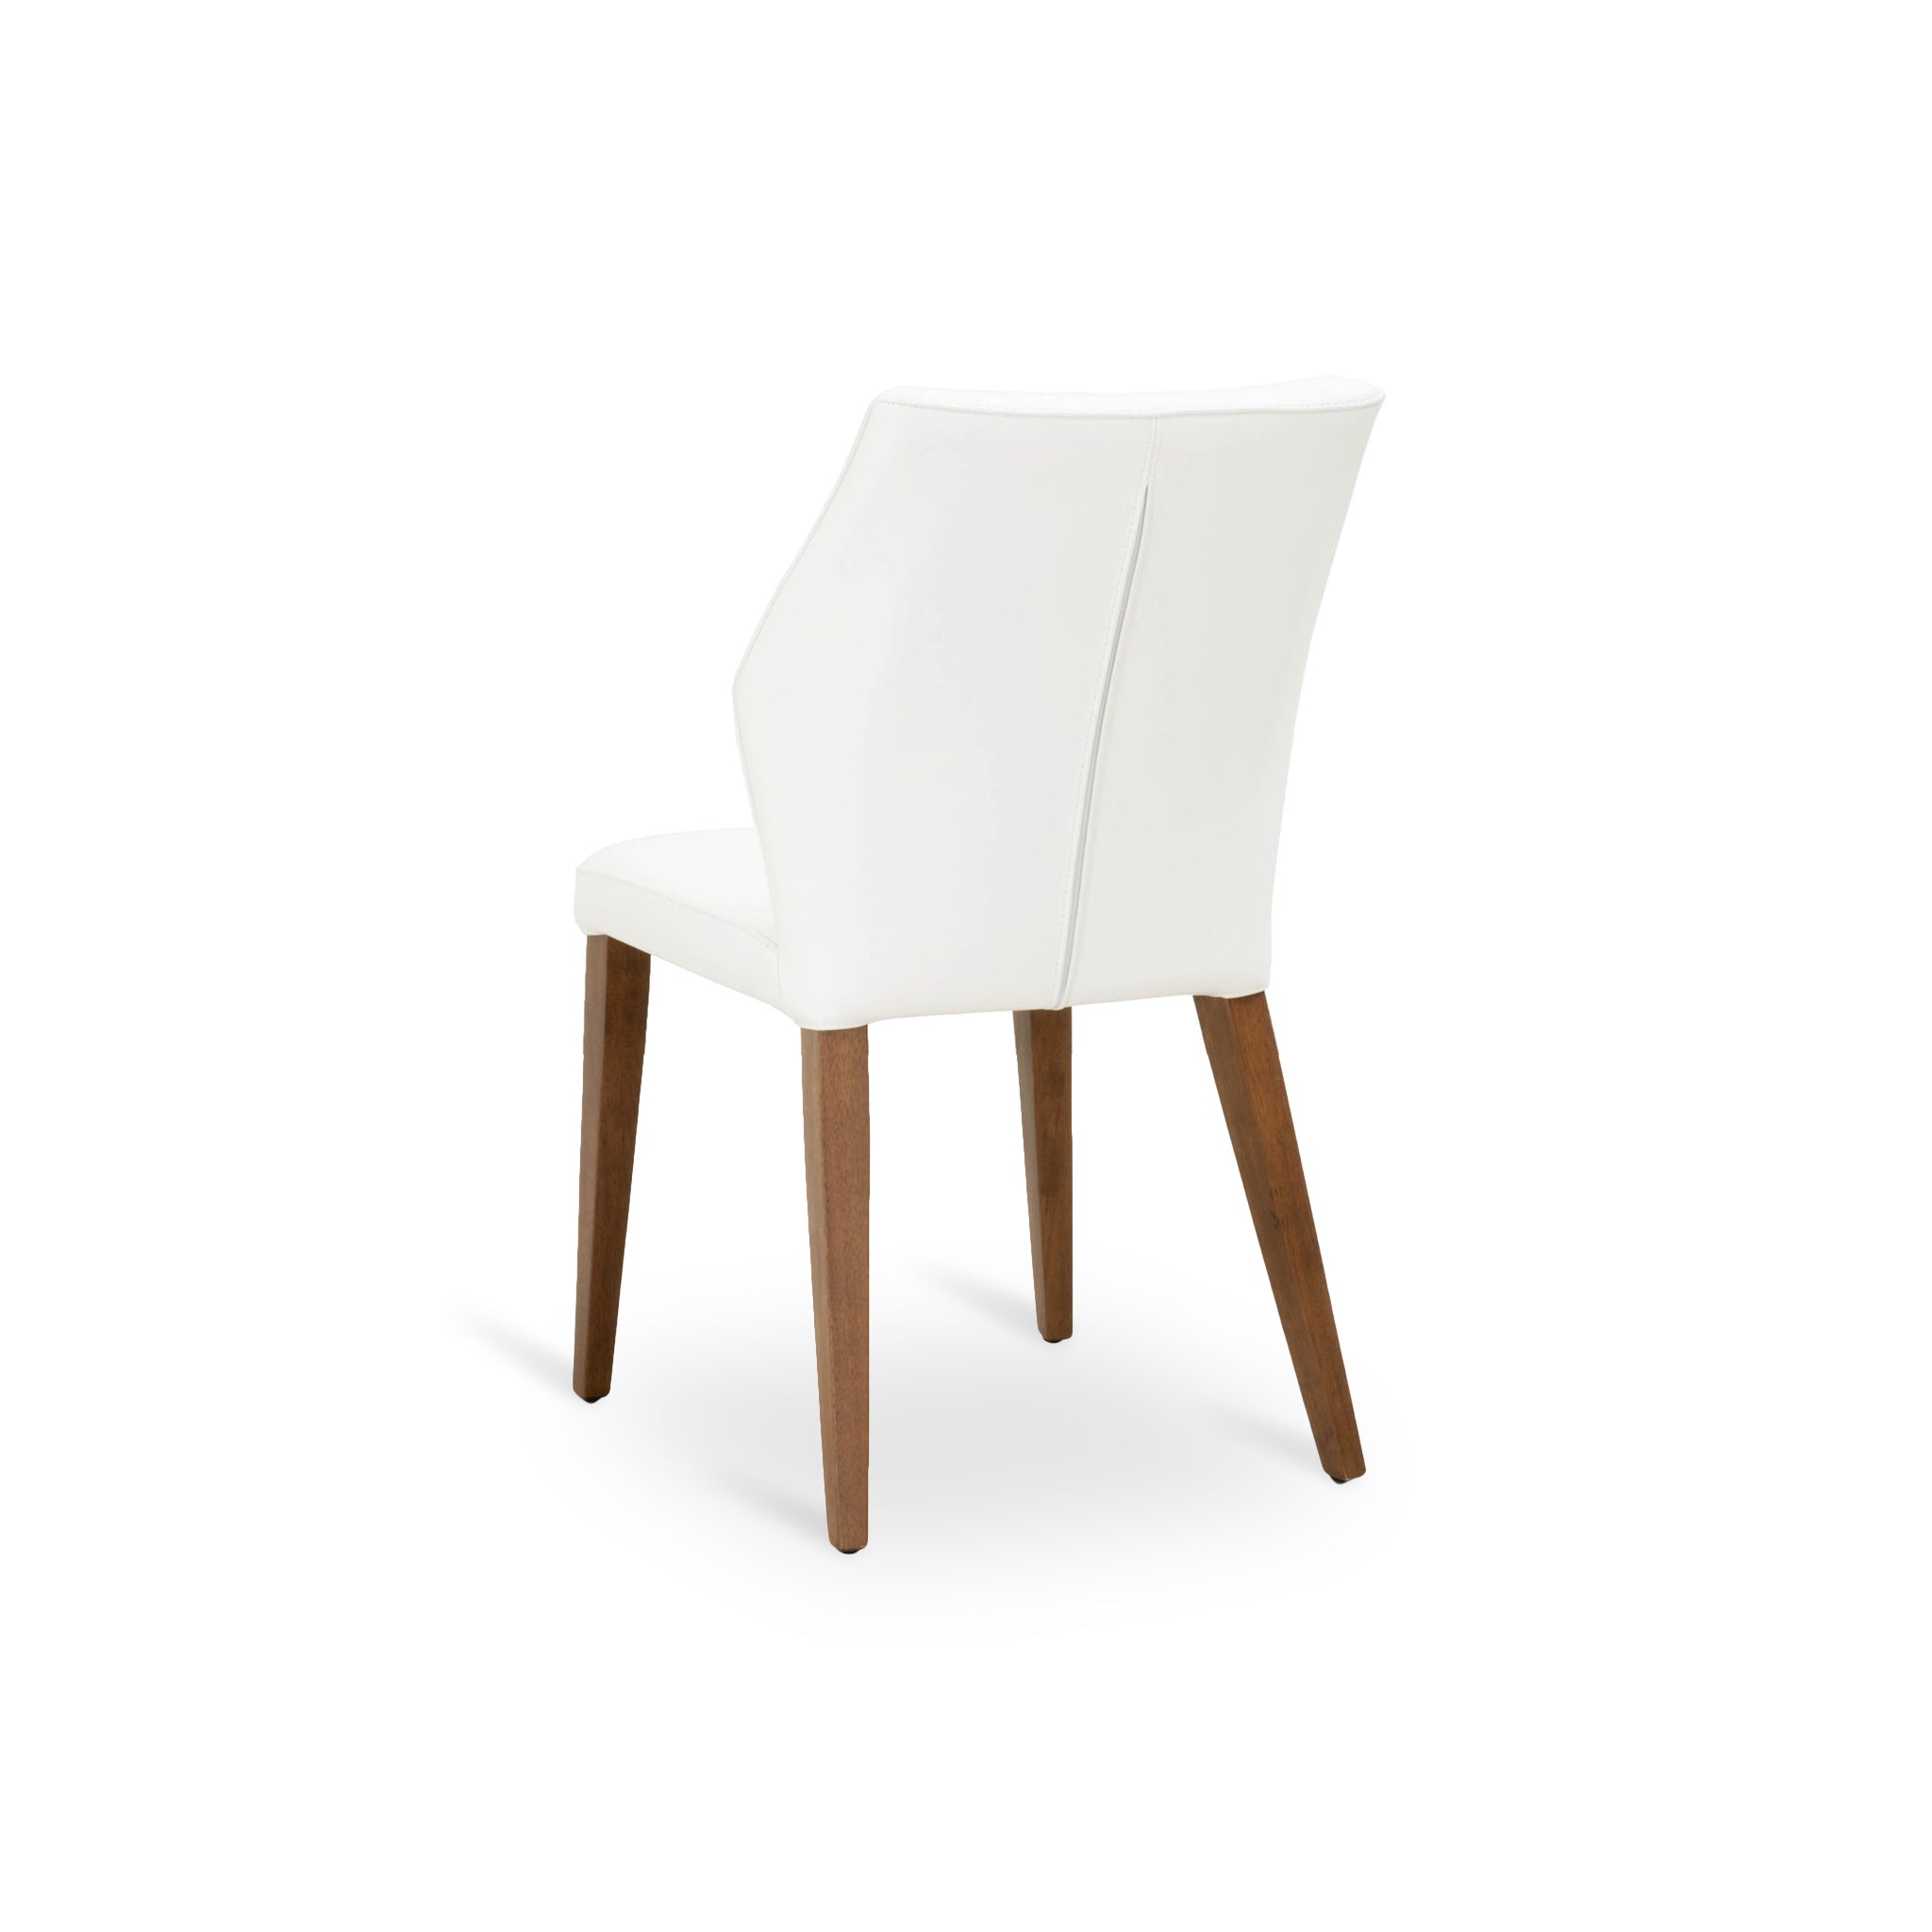 Laufen Dining Chair - Set of 2